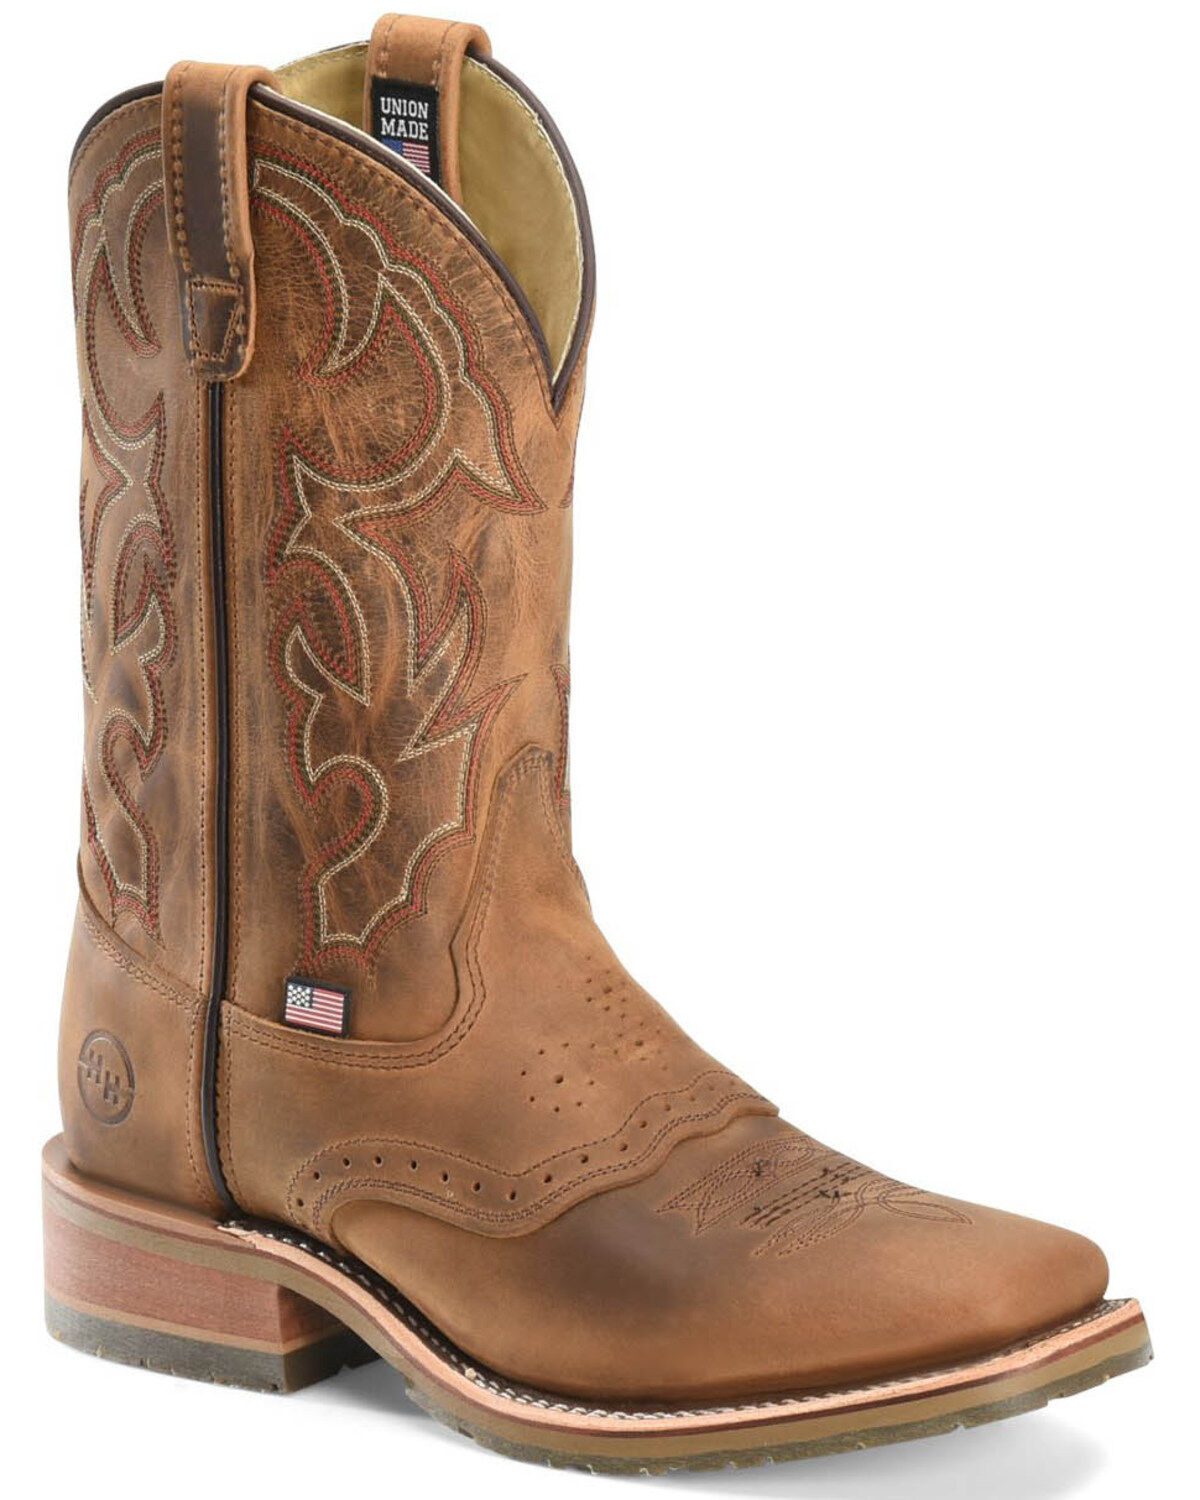 pull on western work boots